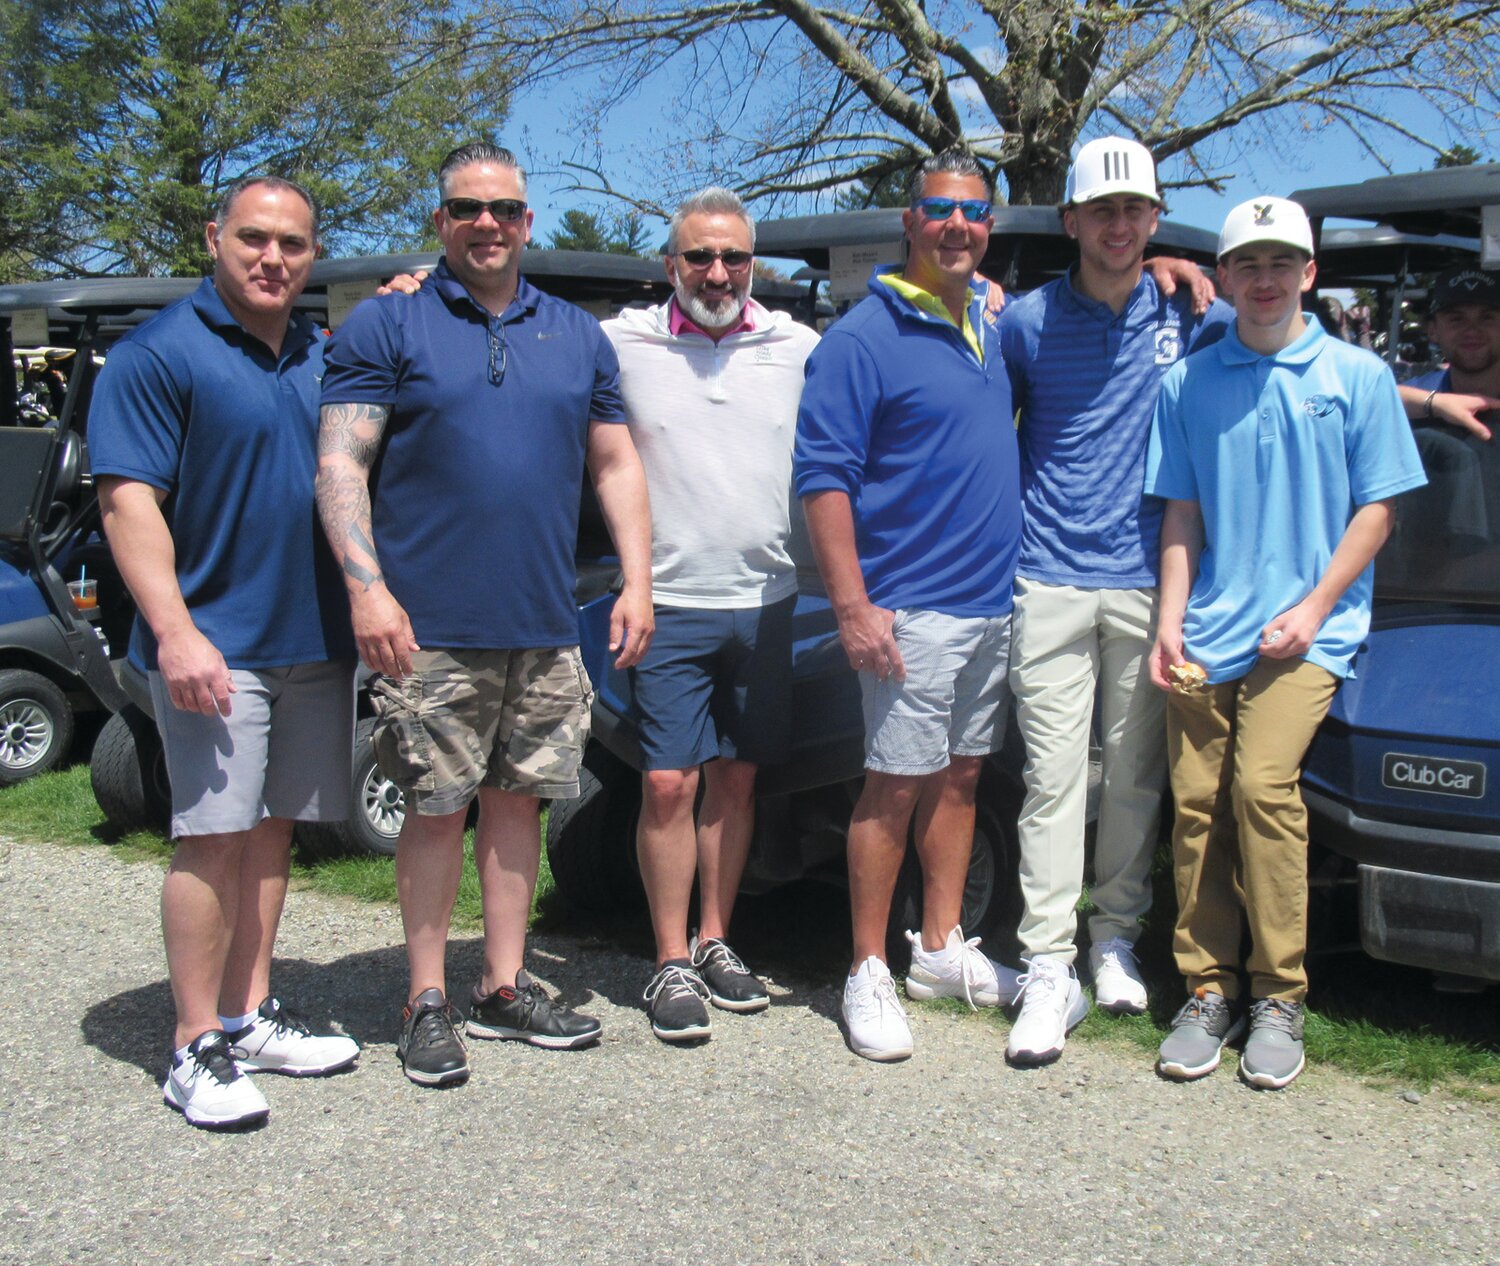 FRIENDLY FOES: Among the 160 golfers who played in Saturday’s 16th annual JMCE Memorial Golf Tournament were: Mike DiRocco. Chris Miller, Arthur Pitassi, Mike St. Angelo, Michael St. Angelo, Michael Picerno, Ryan Parker and Jasper Bruinslot.